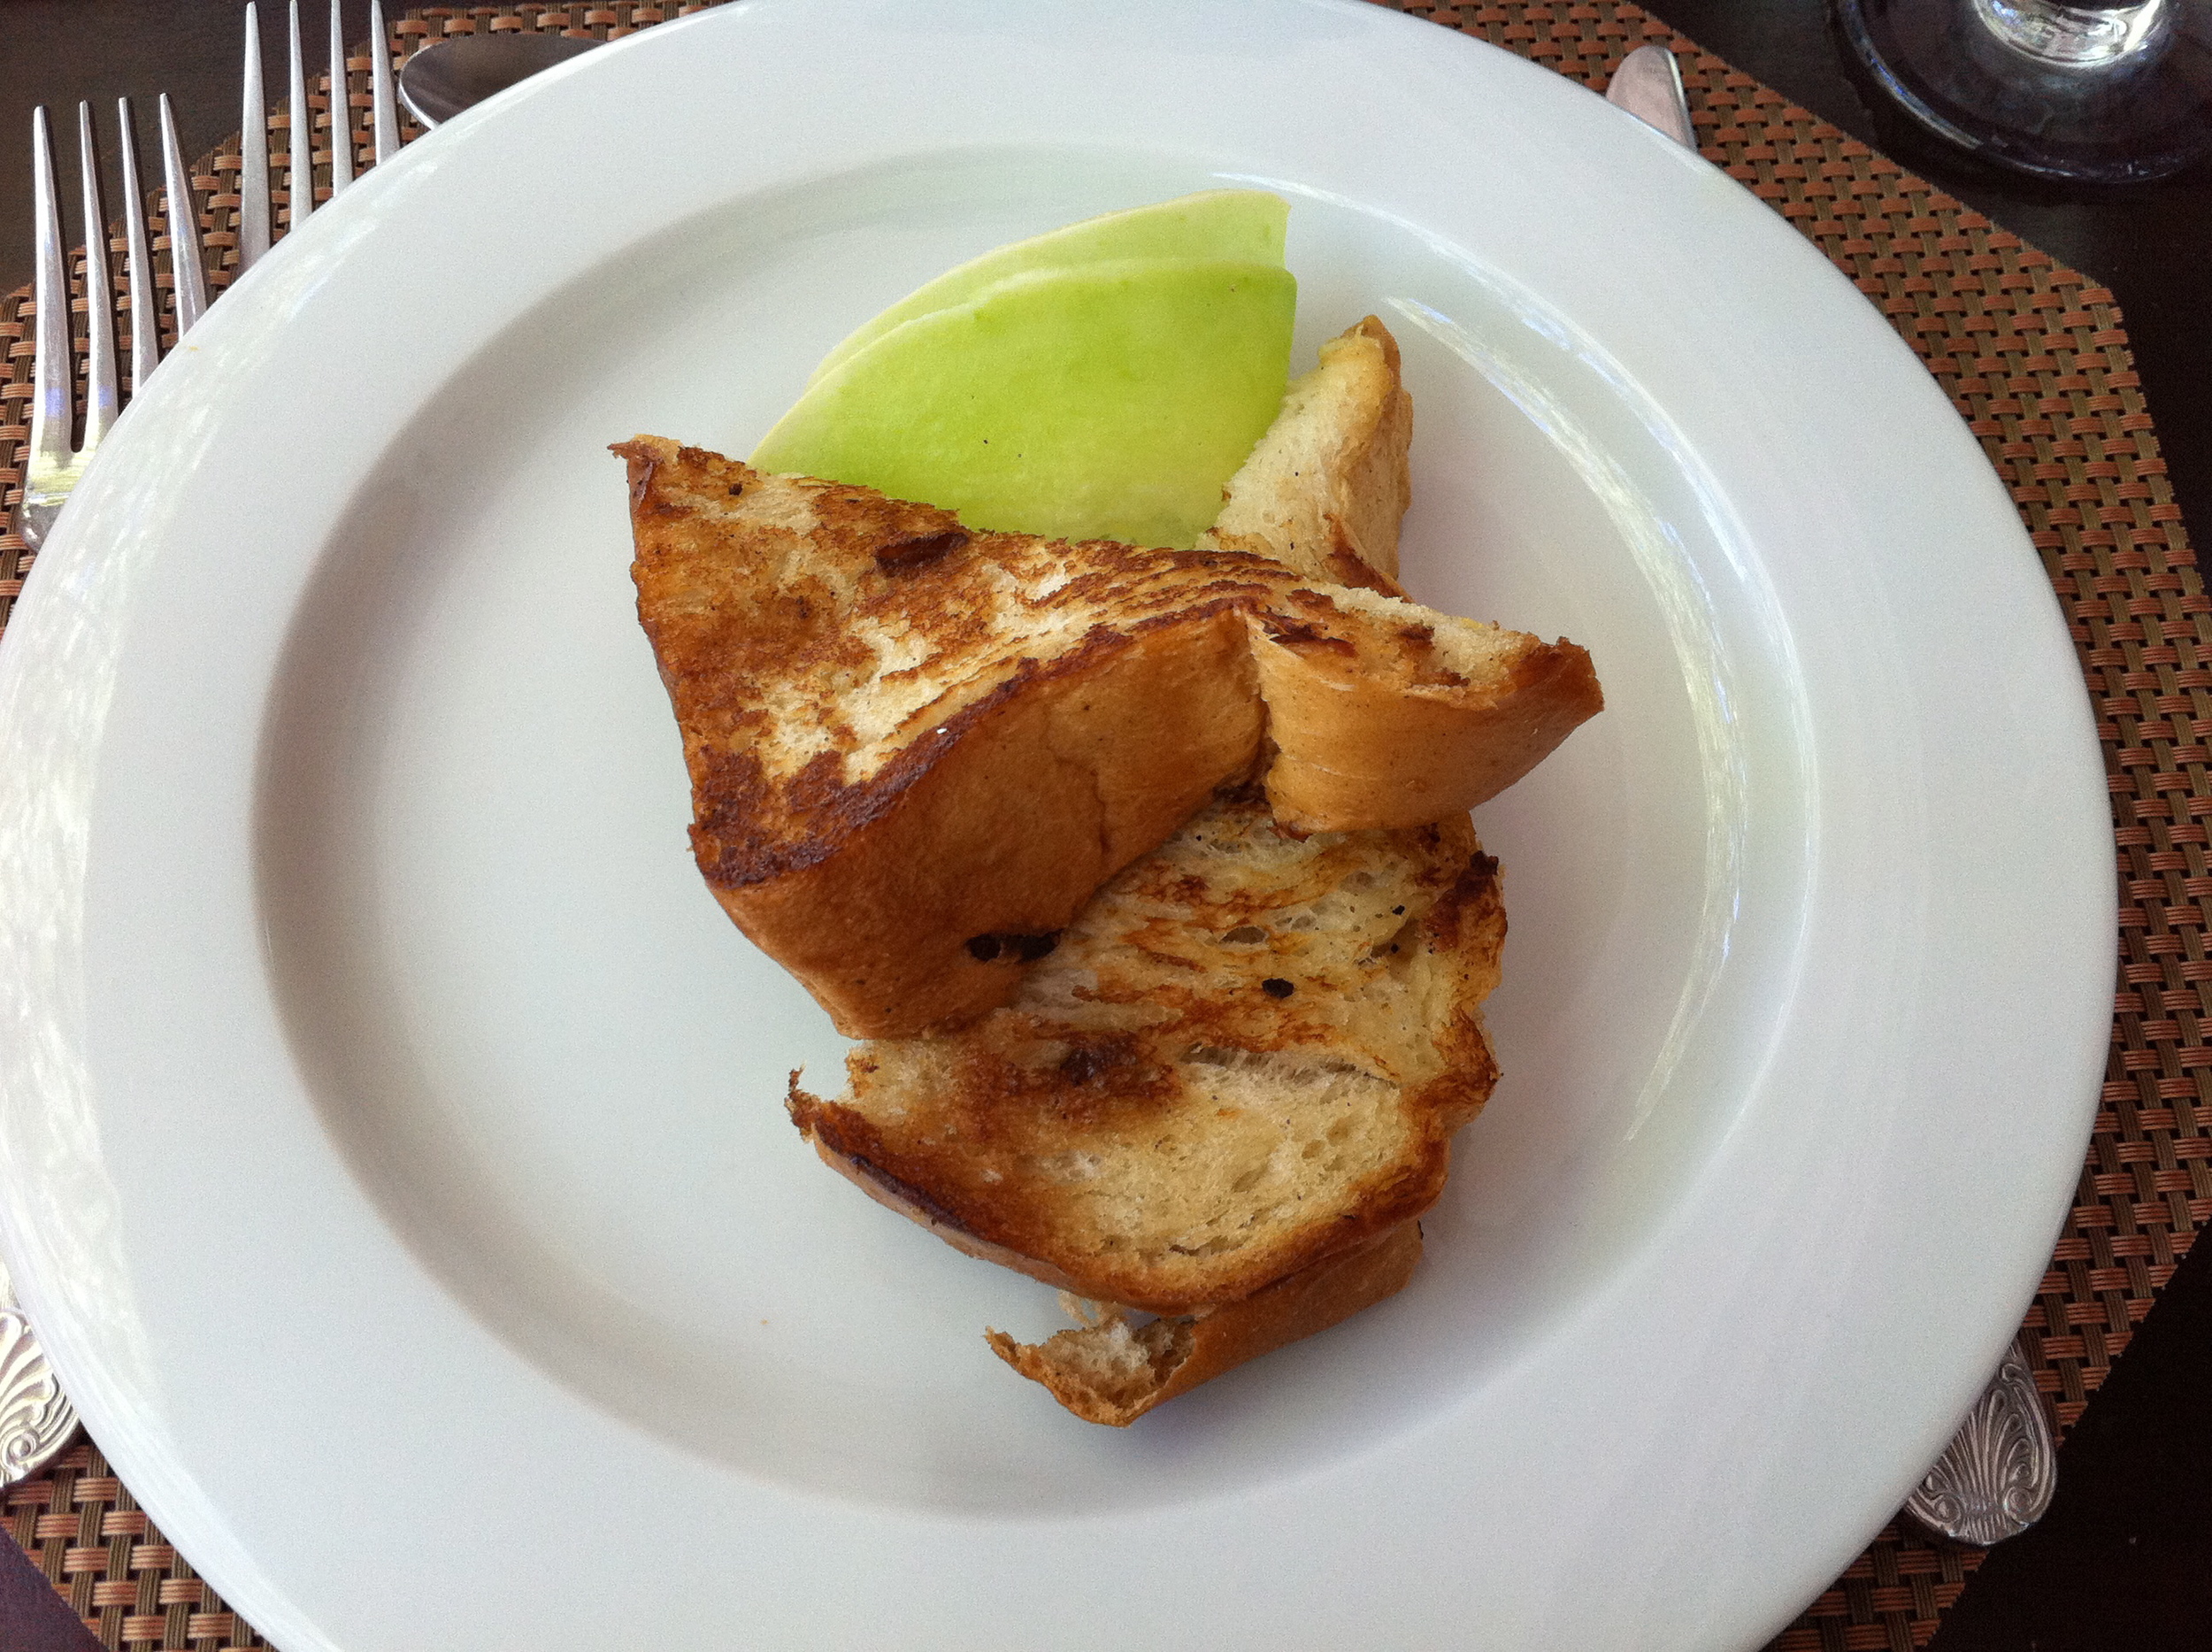 This Jamaican special, rum soaked toast, was a seriously strong breakfast and totally vegan!